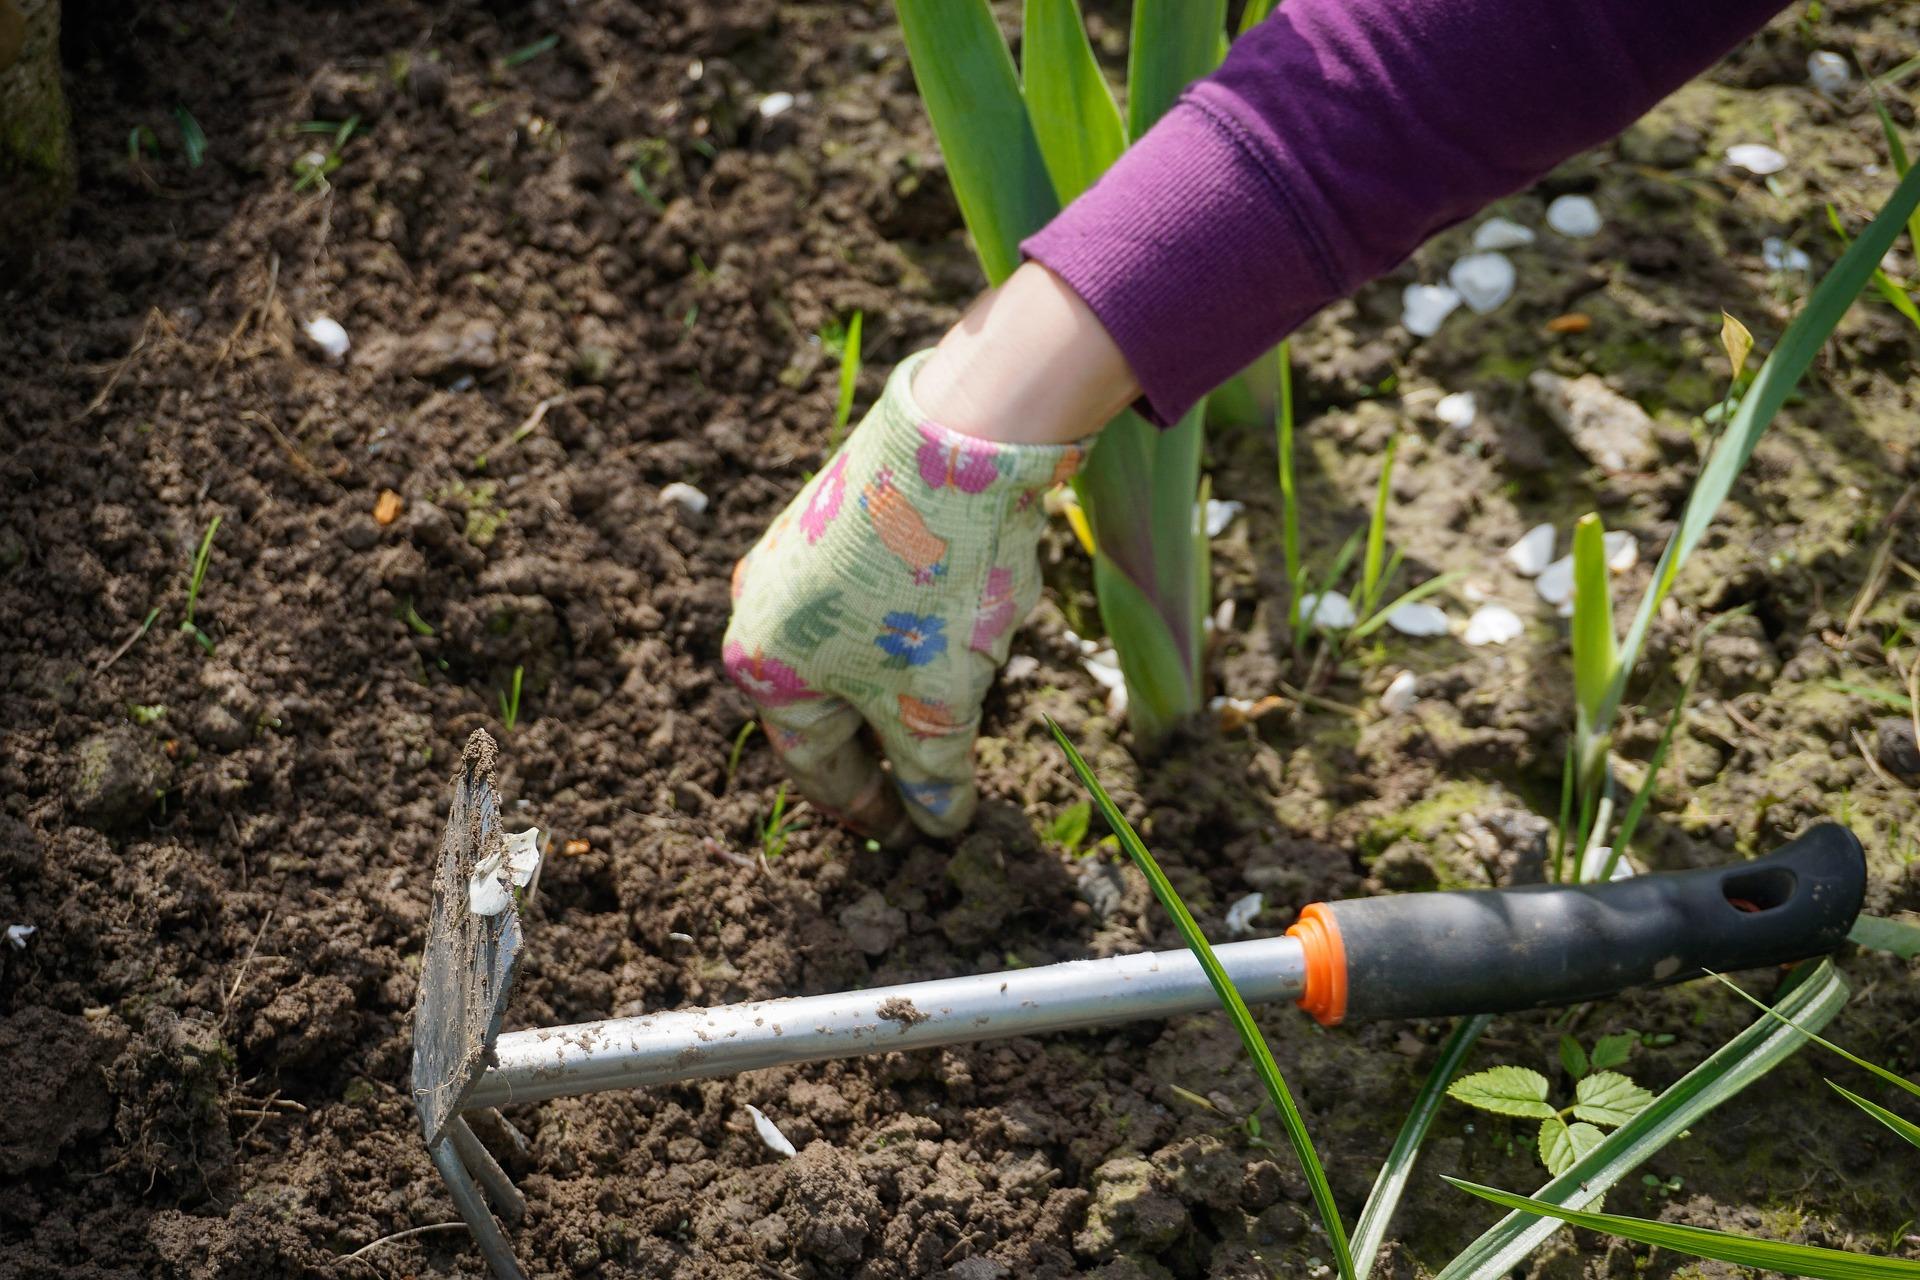 Hands working in soil wearing a garden glove and using a tool